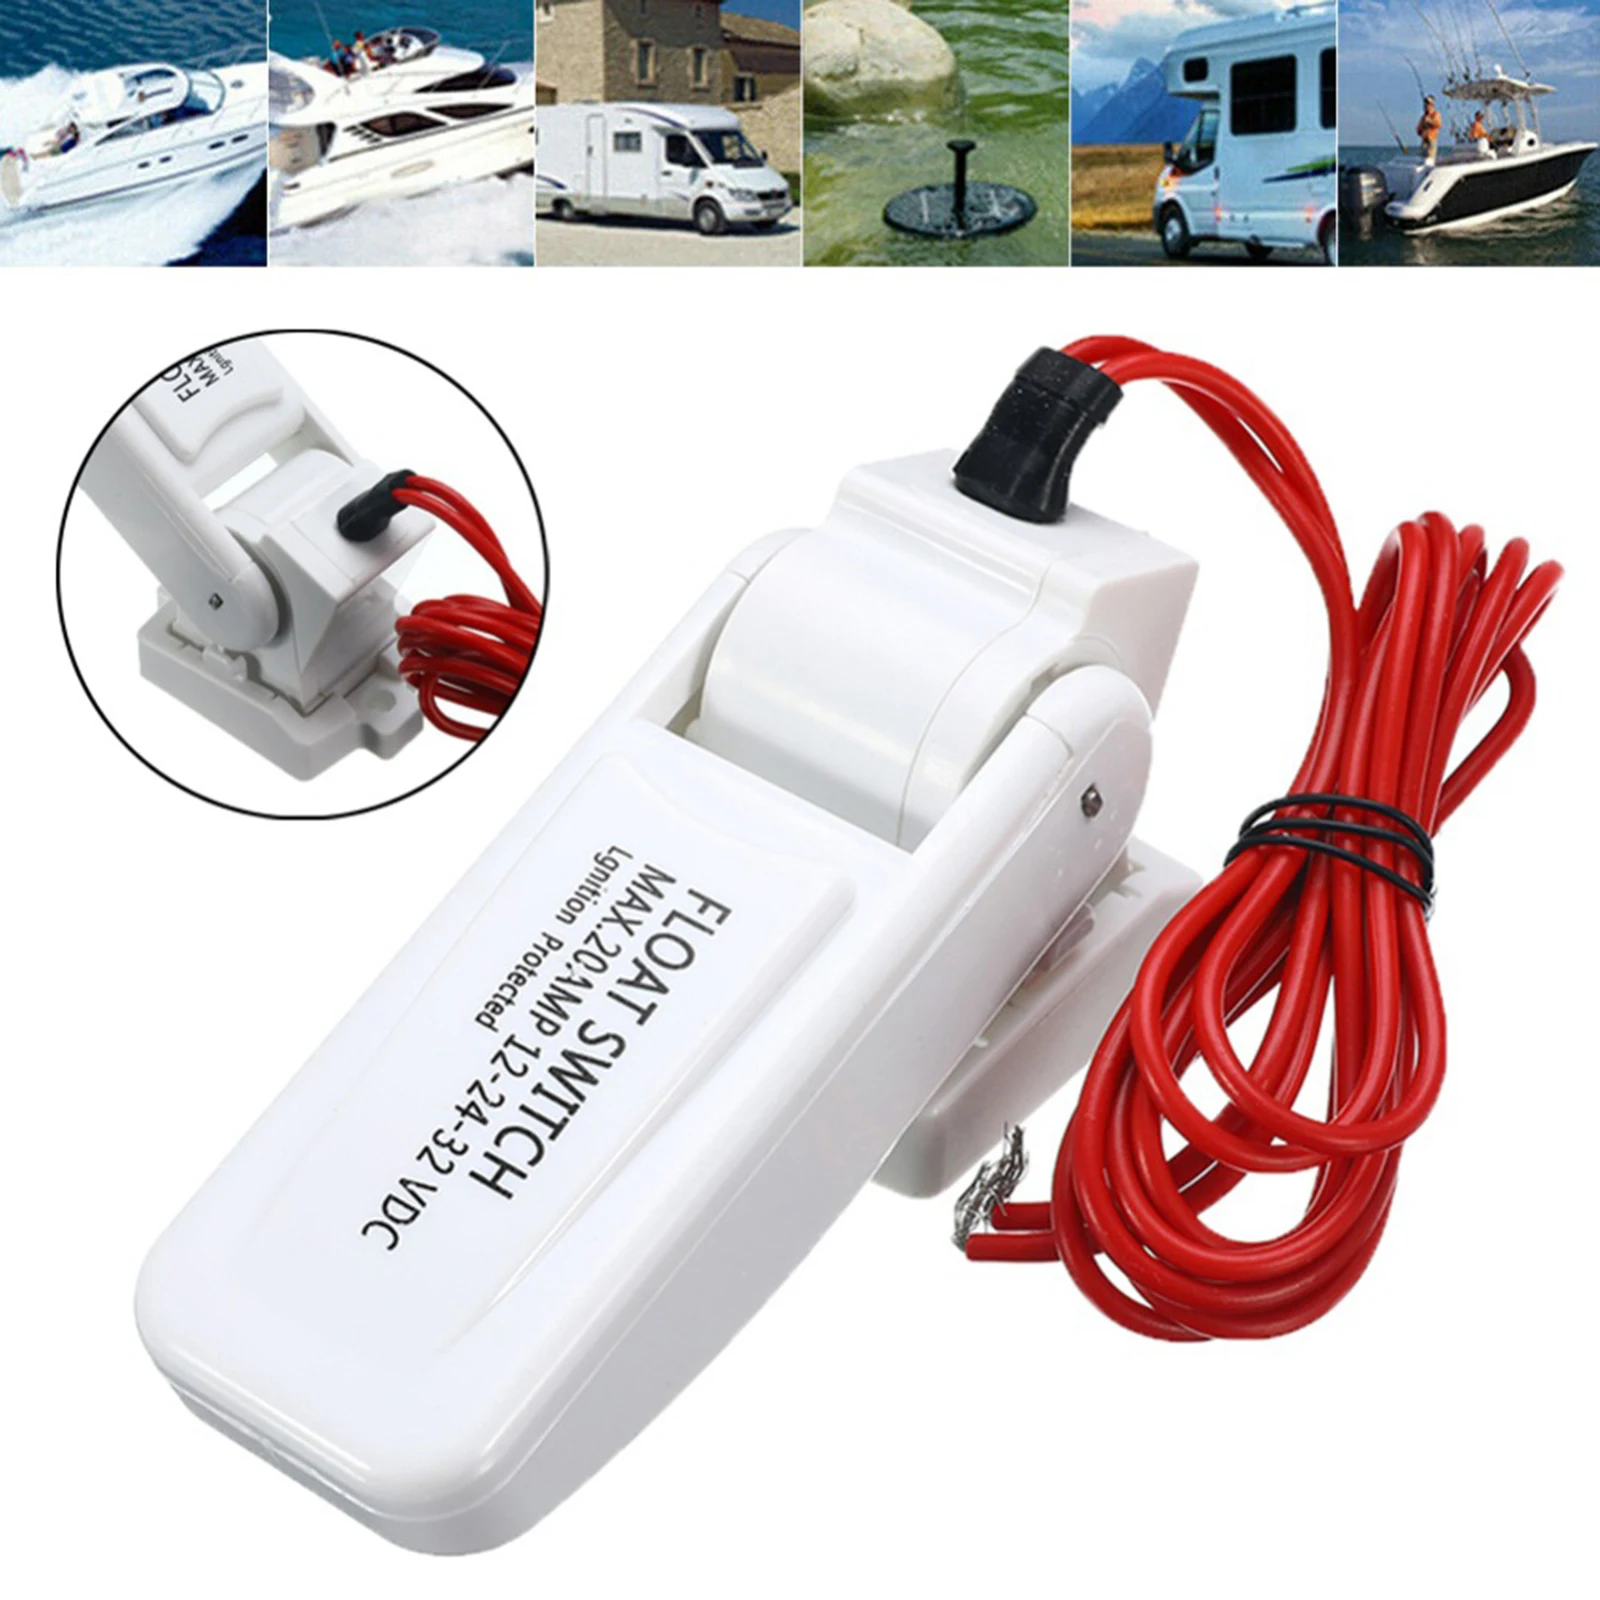 20 AMP Automatic Electric Marine Bilge Pump Float Switch DC Level Controller Floating Flow Sensor Switch White